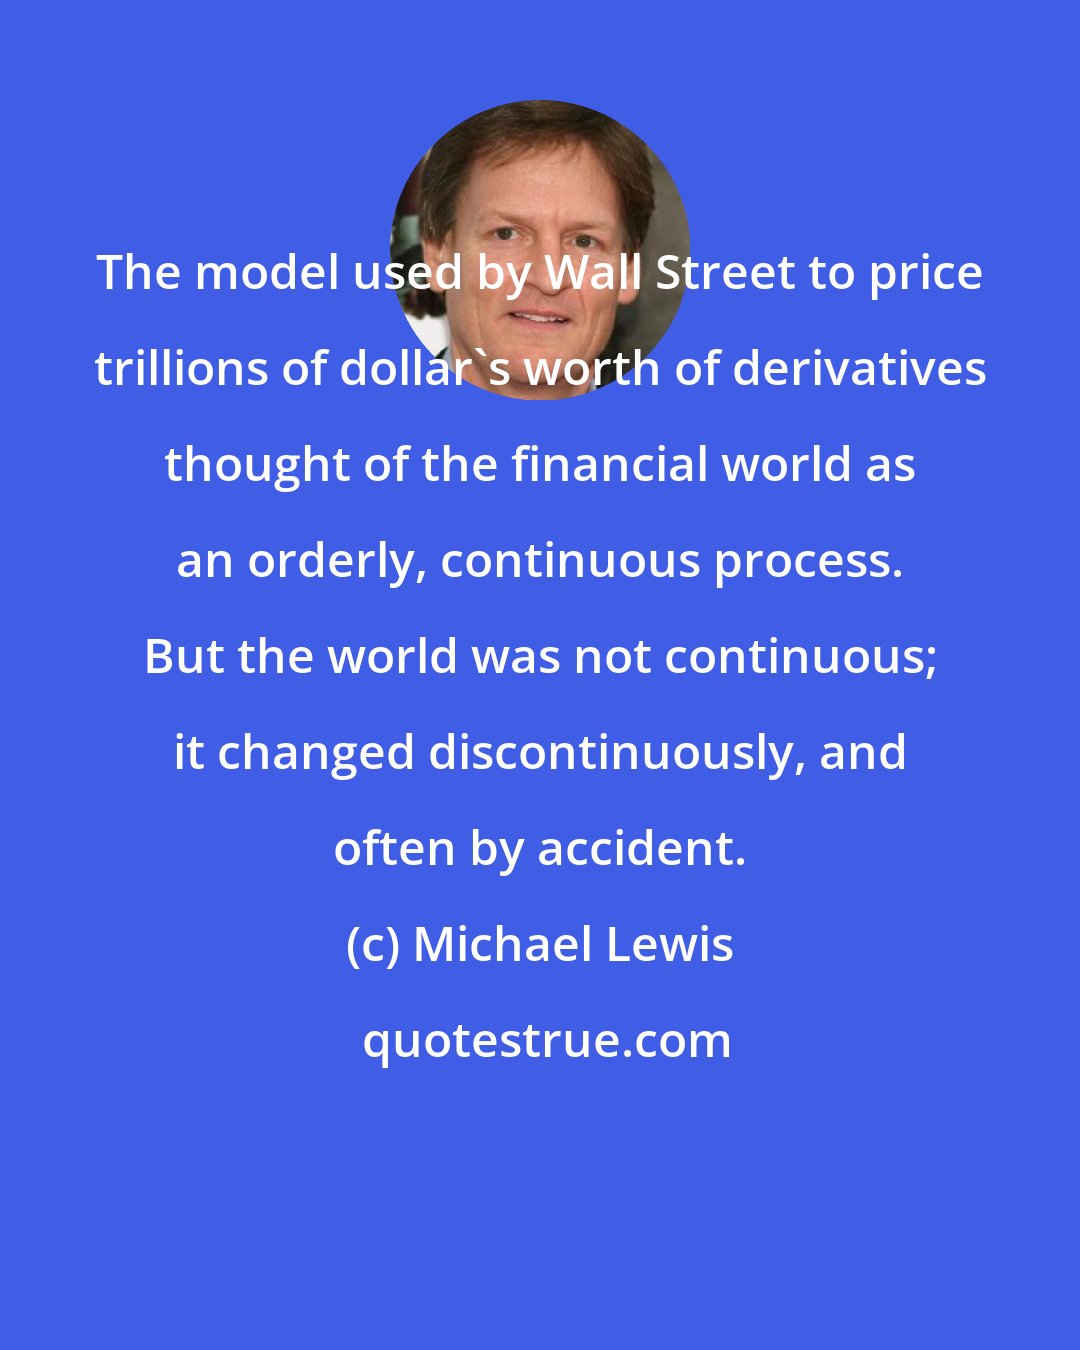 Michael Lewis: The model used by Wall Street to price trillions of dollar's worth of derivatives thought of the financial world as an orderly, continuous process. But the world was not continuous; it changed discontinuously, and often by accident.